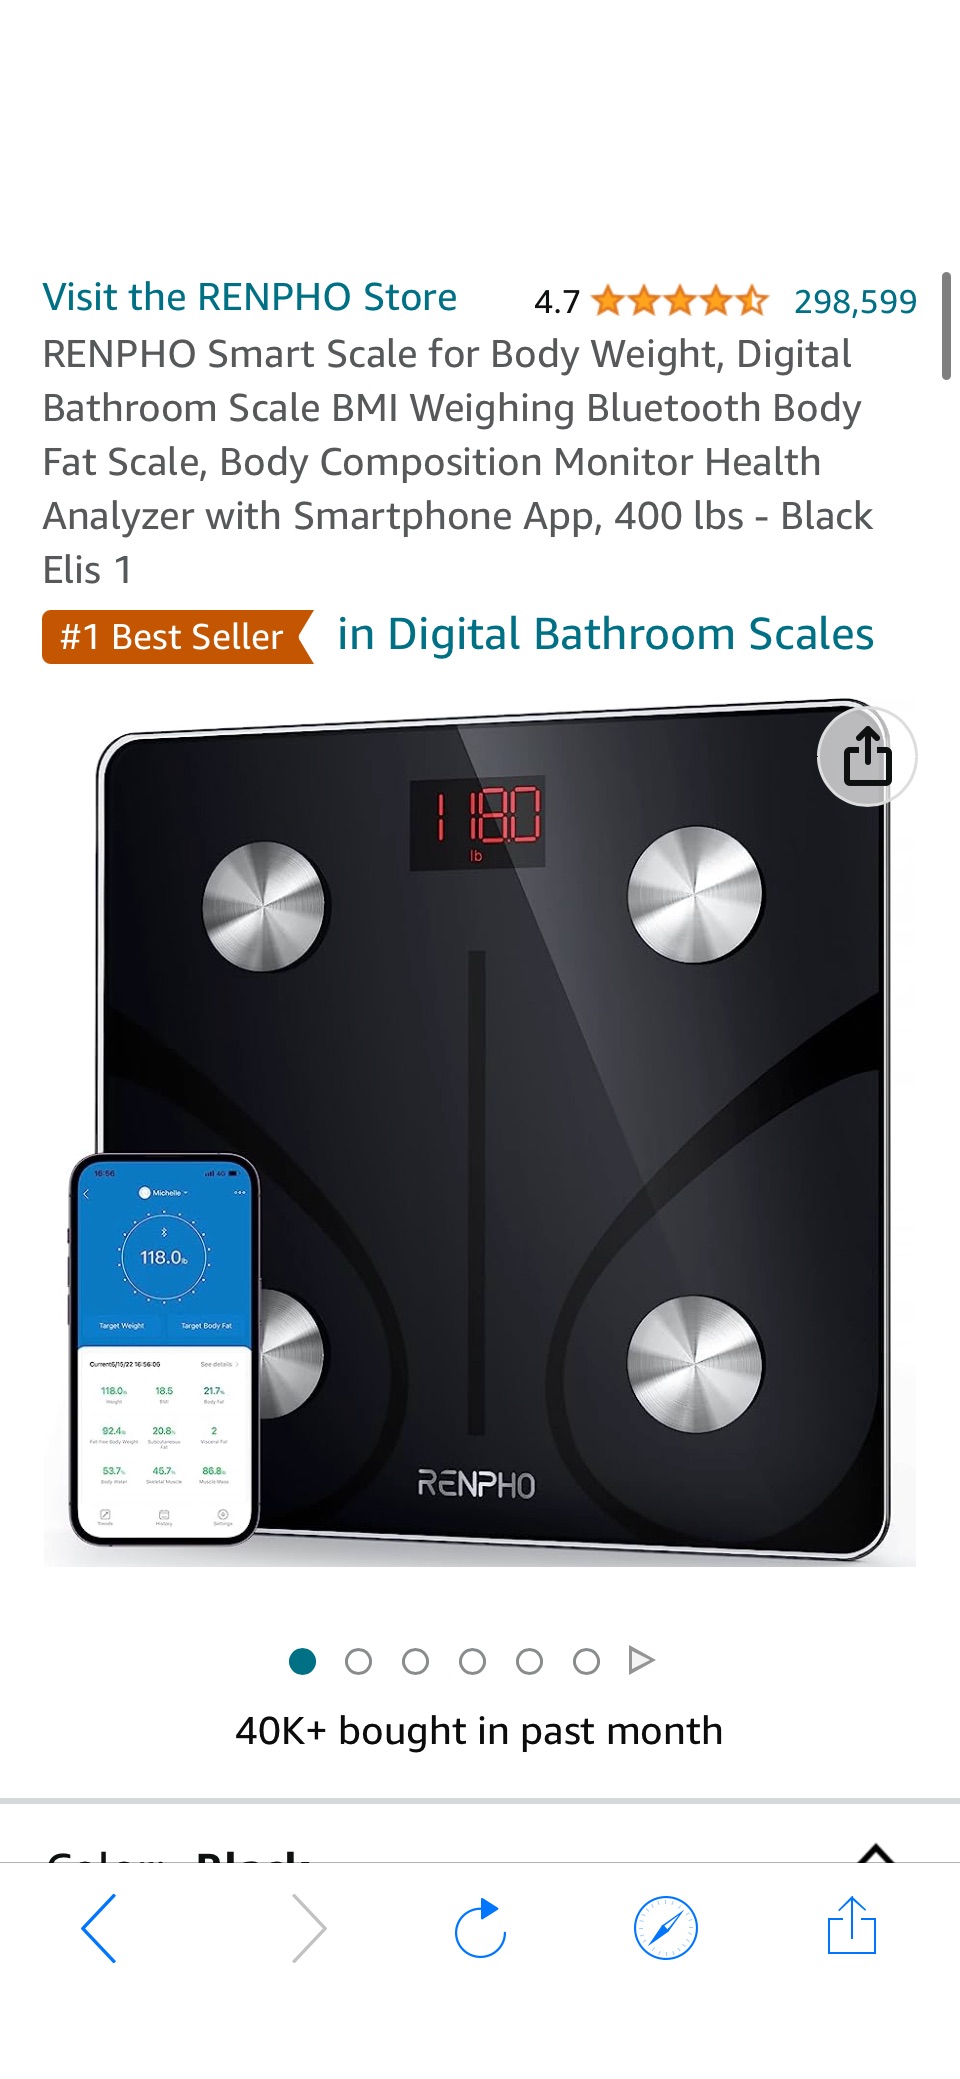 Amazon.com: RENPHO Smart Scale for Body Weight, Digital Bathroom Scale BMI Weighing Bluetooth Body Fat Scale, Body Composition Monitor Health Analyzer with Smartphone App, 400 lbs - Black Elis 1 : Health & Household原价34.99